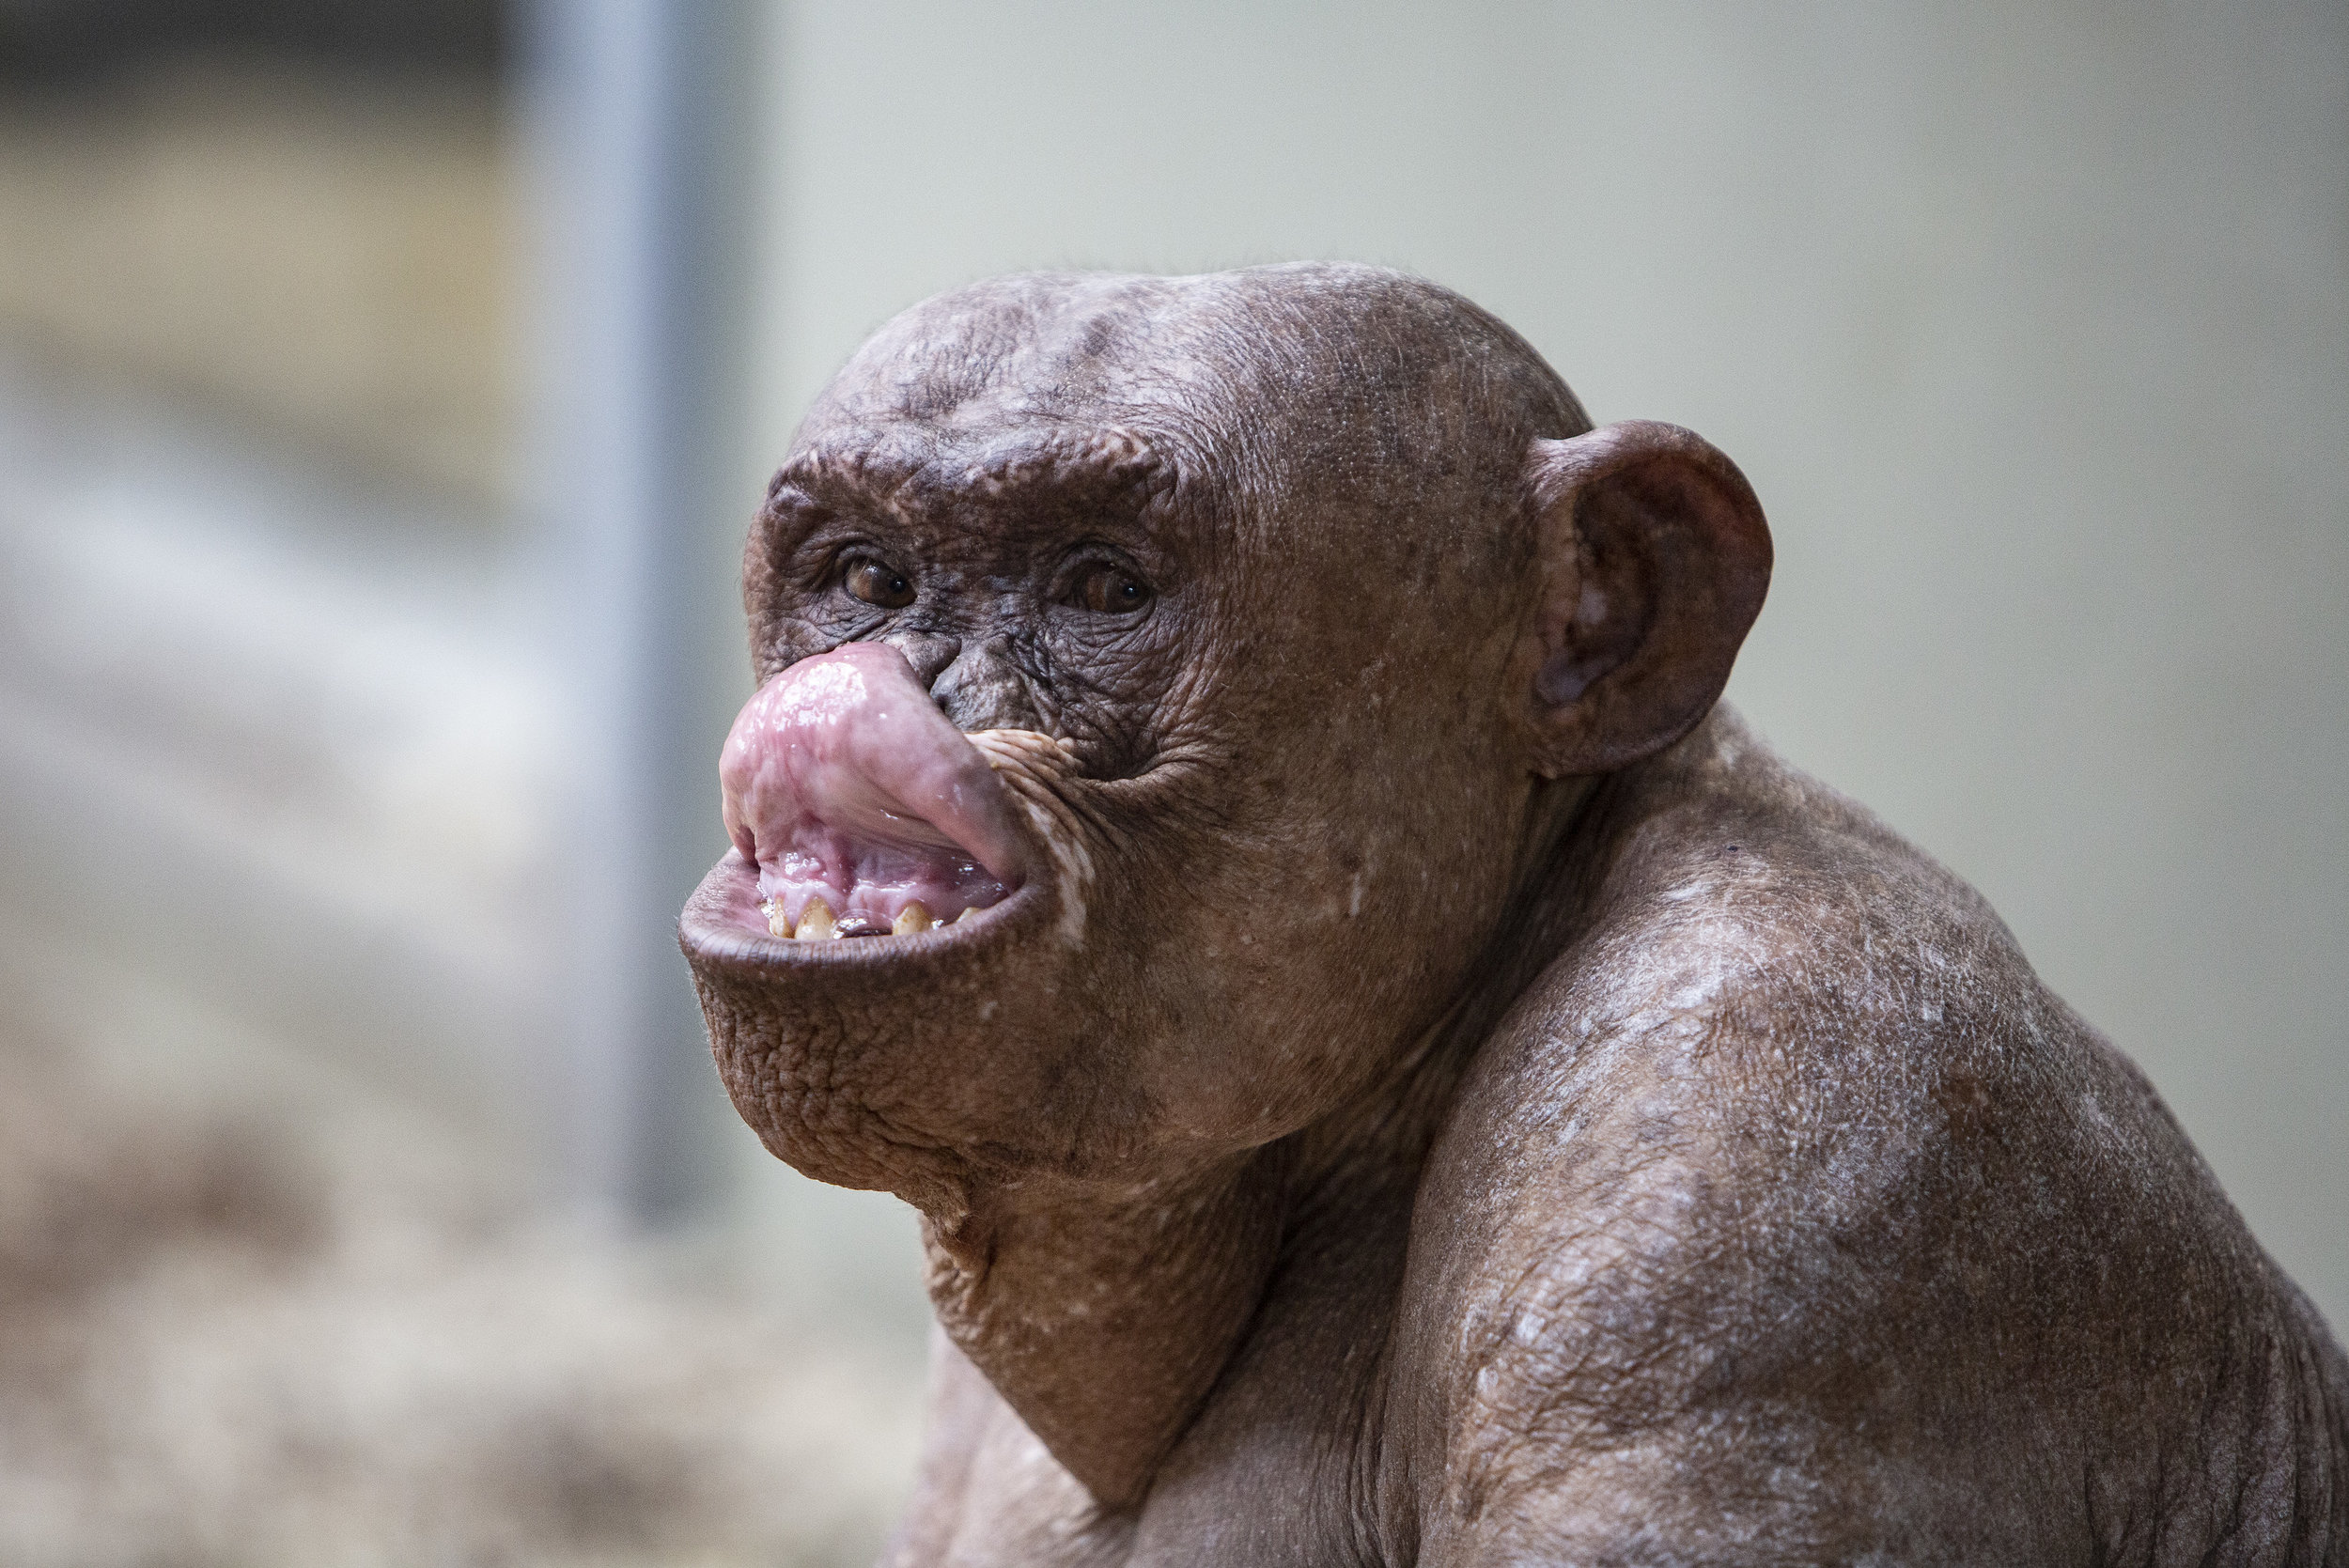  Chimpazee Jambo makes a funny face at vistors before exploring his new home at Twycross Zoo, Leicstershire - a new outdoor enclosure designed to be as enriching as possible for the animals.
Photo by Lucy Ray, 13 June 2018
 